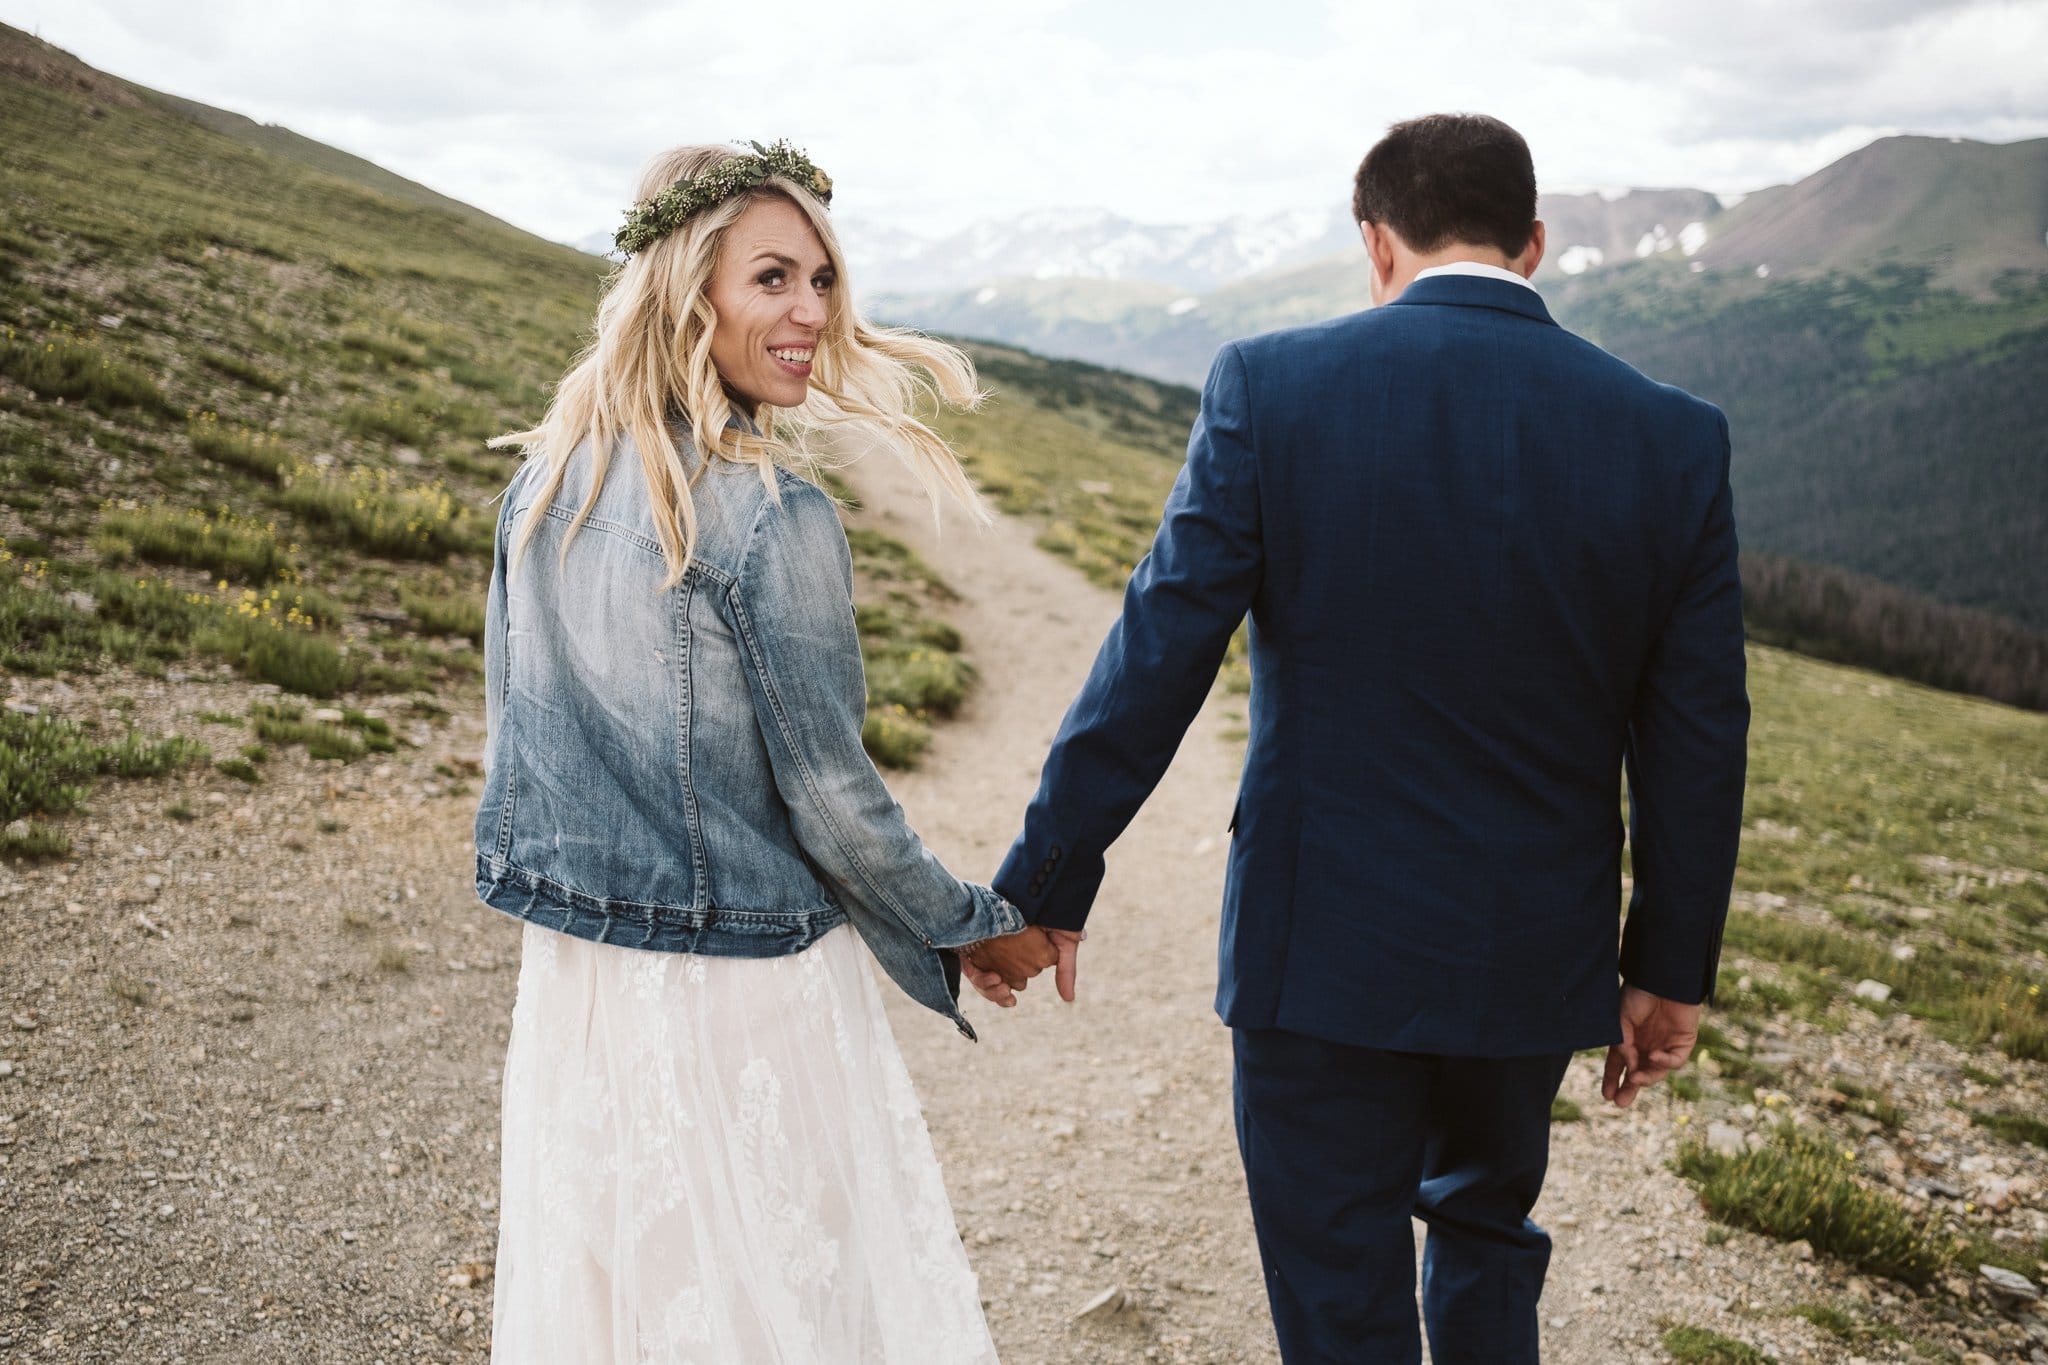 Bride and groom hiking elopement photos at Trail Ridge Road, Rocky Mountain National Park wedding, bride in denim jacket and wedding dress